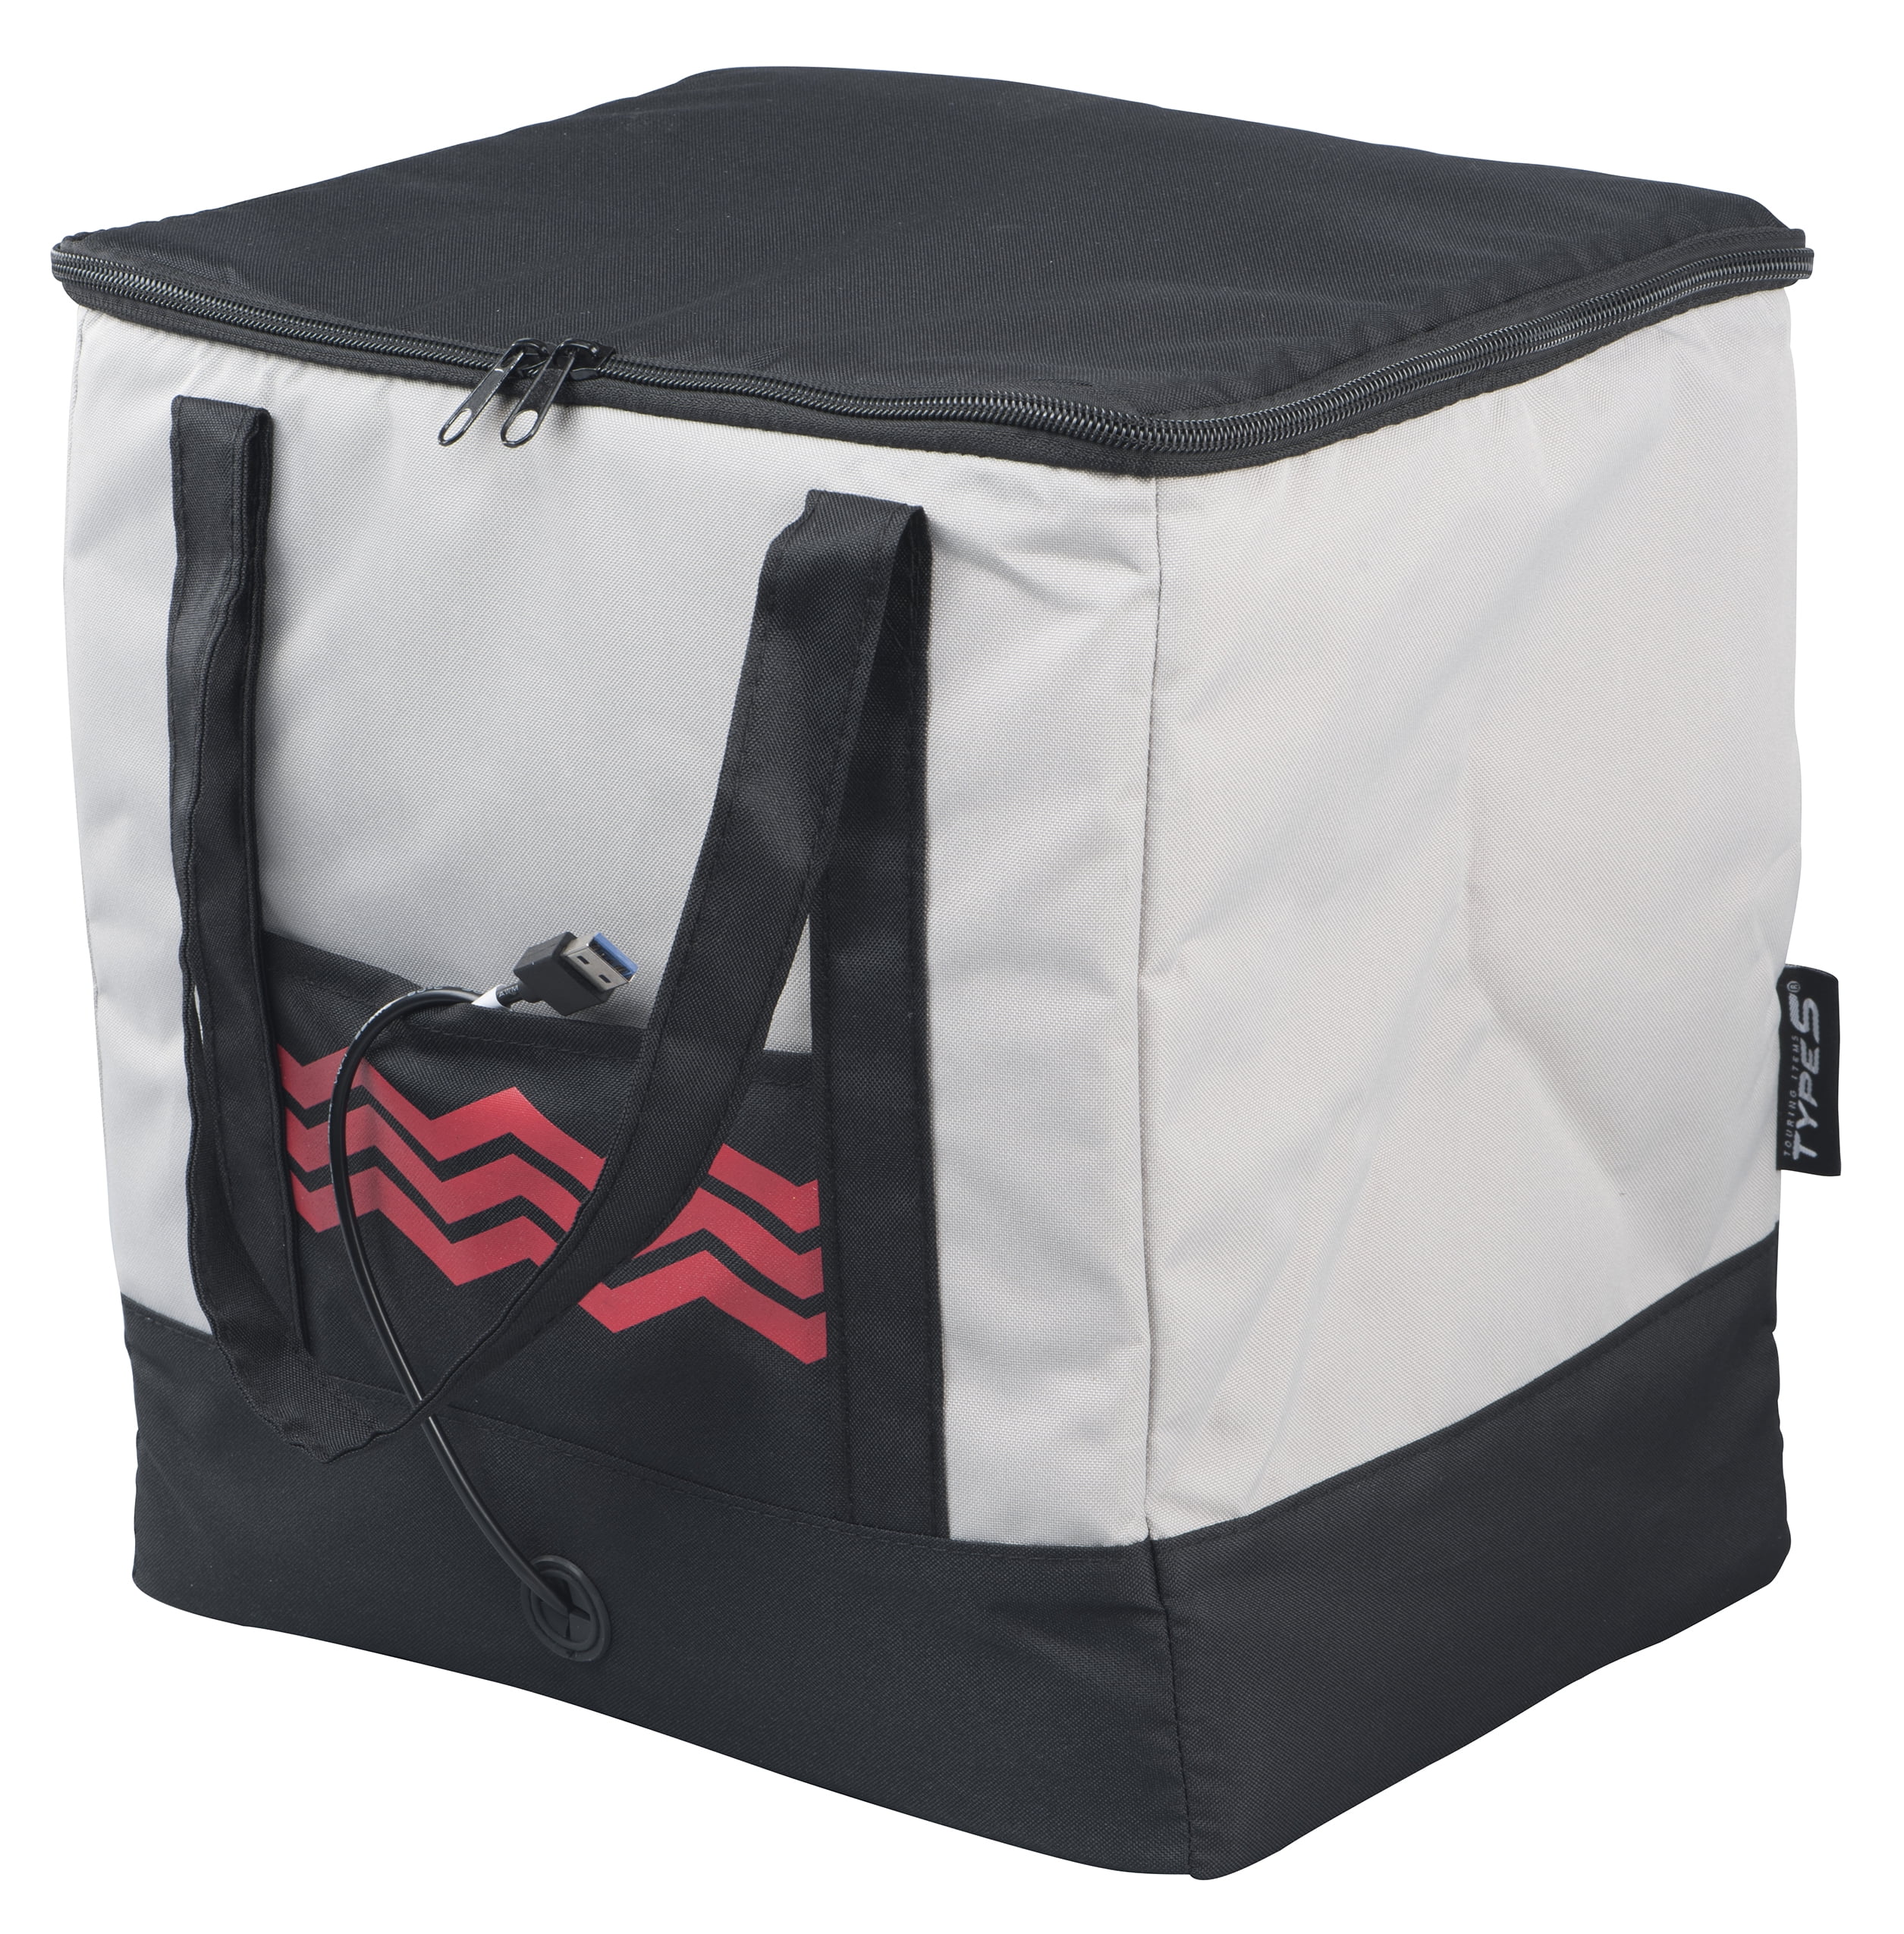 Winplus TYPES CARGOPODS™ 5V  Food Warmer Premium Insulated Food Delivery Bag 12" (H) x 9.5" (W) x 12" (L) inches Holds 23 quarts Waterproof Catering Supply Bag for Hot Food Delivery - Premium Food Warmer Bag